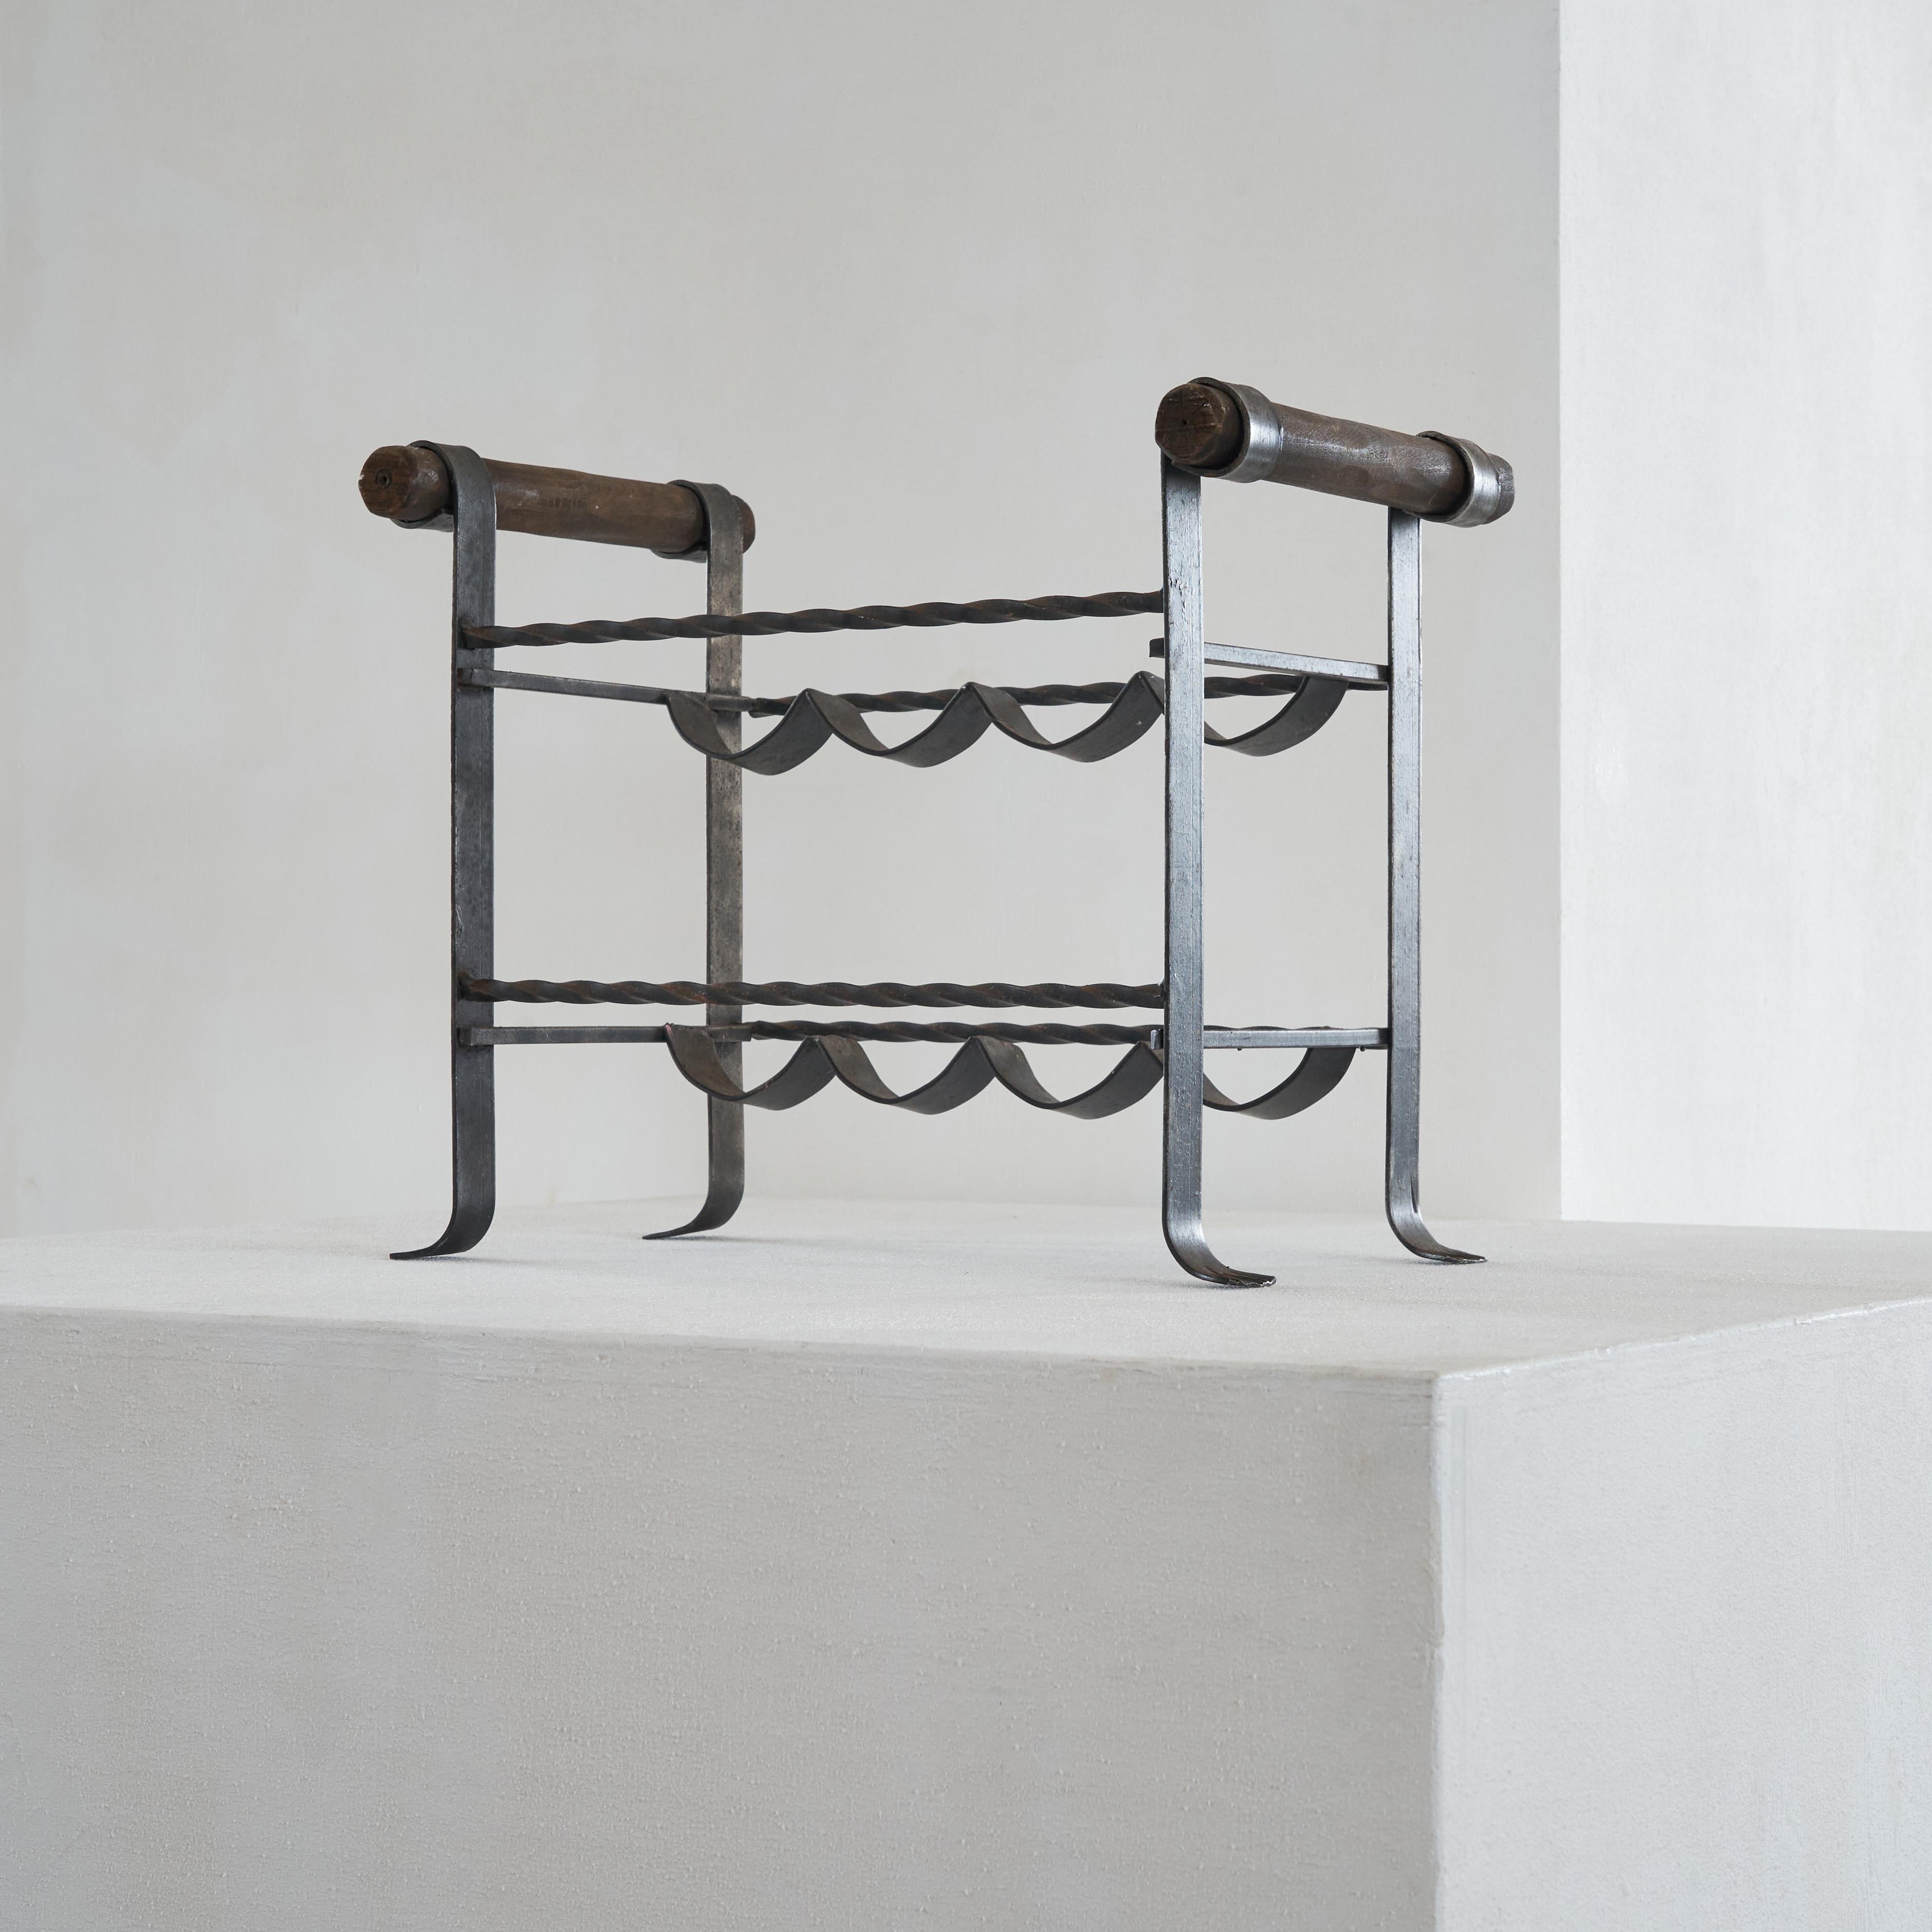 Brutalist wine rack in wrought iron and wood 1960s.

This is a wine rack in wrought iron and wood with a very distinct Brutalist design. The the warm wood and the wrought iron do compliment each other in a very midcentury fashion. The turned rods